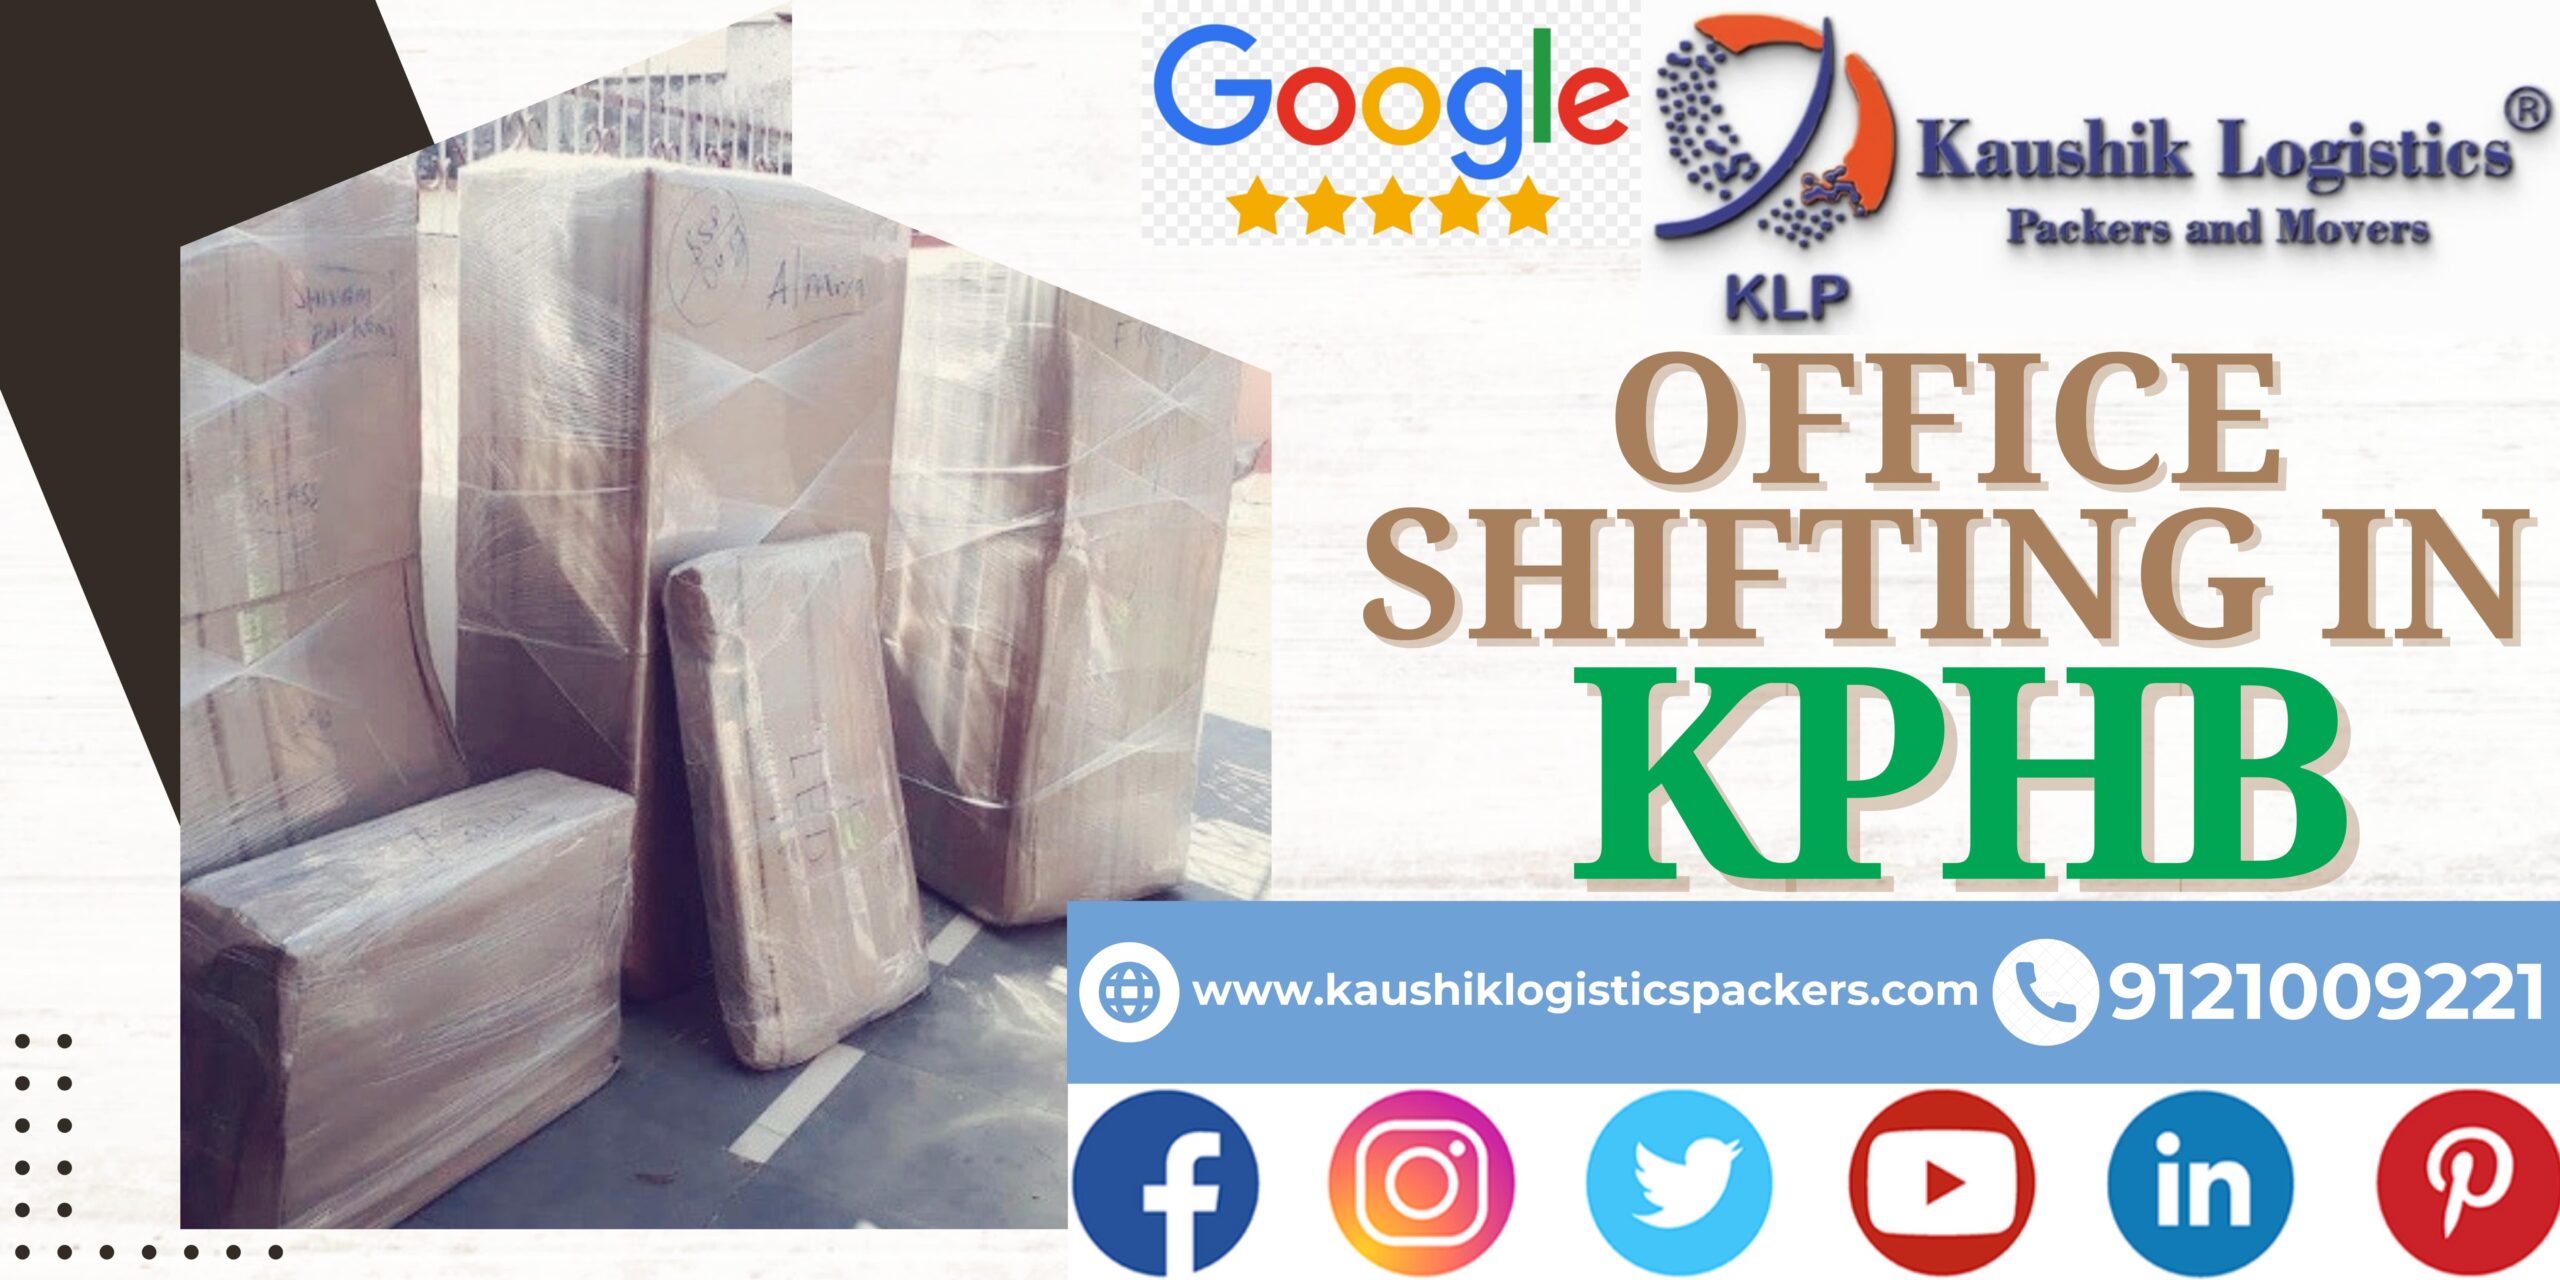 Packers and Movers In KPHB